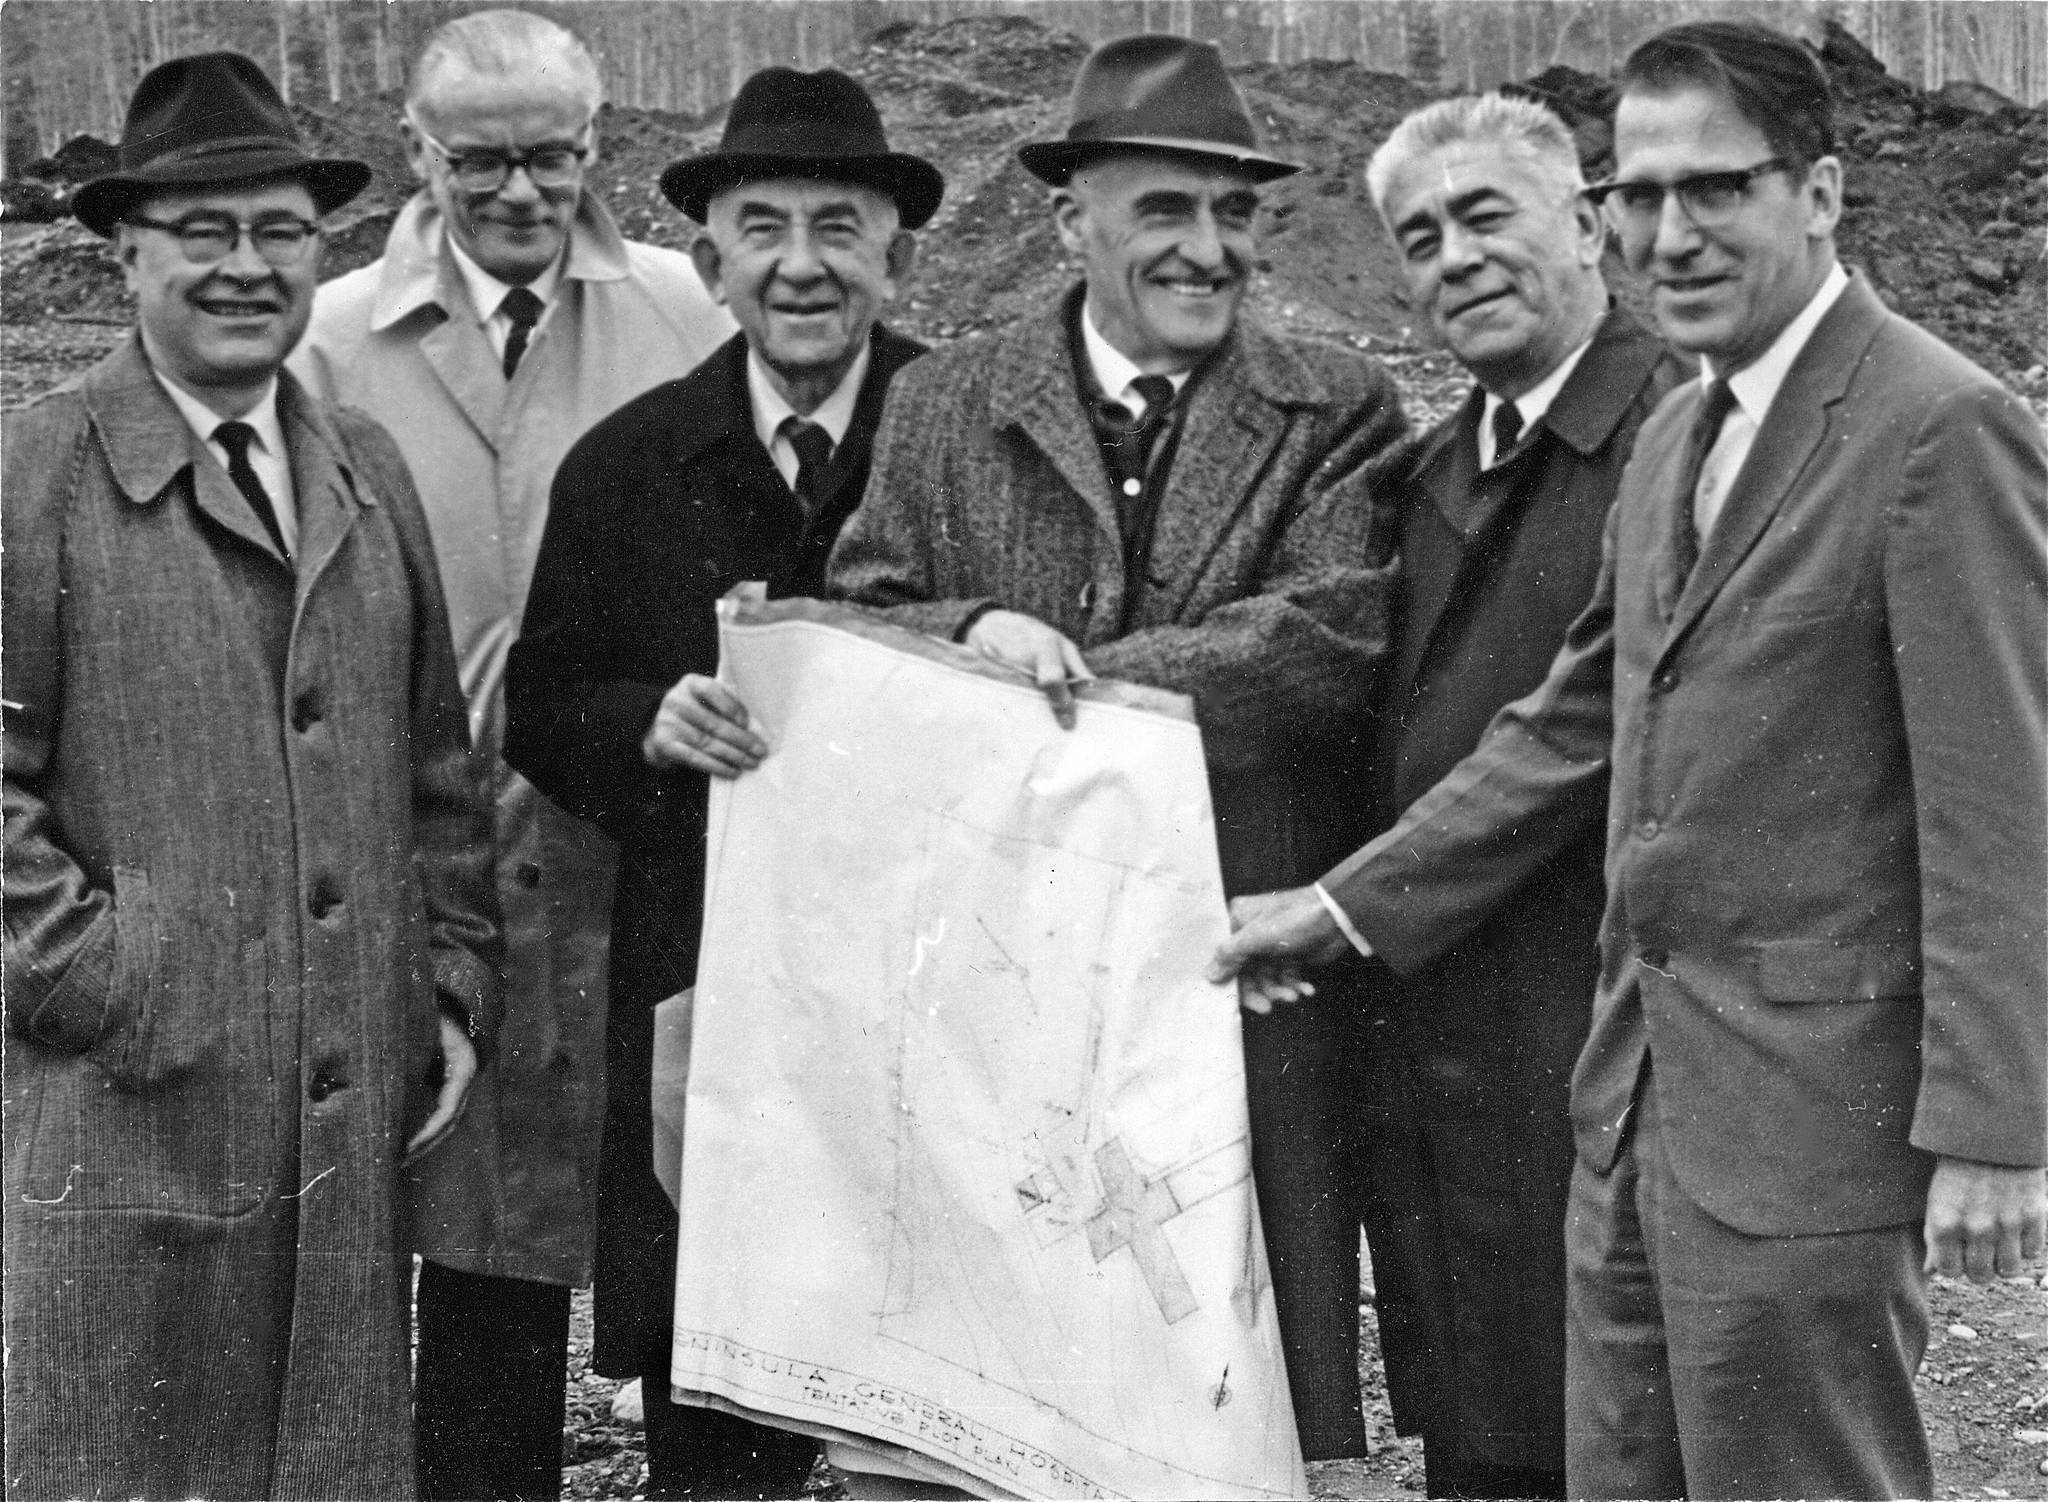 Cheechako News file photo from KPC’s Kenai Peninsula Historical Photo Repository
Politicians lined up at the March 1966 groundbreaking for the new hospital. Pictured (L-R) are George Sundborg, administrative assistant to U.S. Sen. Ernest Gruening; Alaska gubernatorial candidate Wendell Kay; Sen. Gruening holding the construction plans with U.S. Rep. Ralph Rivers; Elmer Gagnon, Alaska director of the Federal Housing Administration; and Per Osmar, the hospital campaign fund manager.